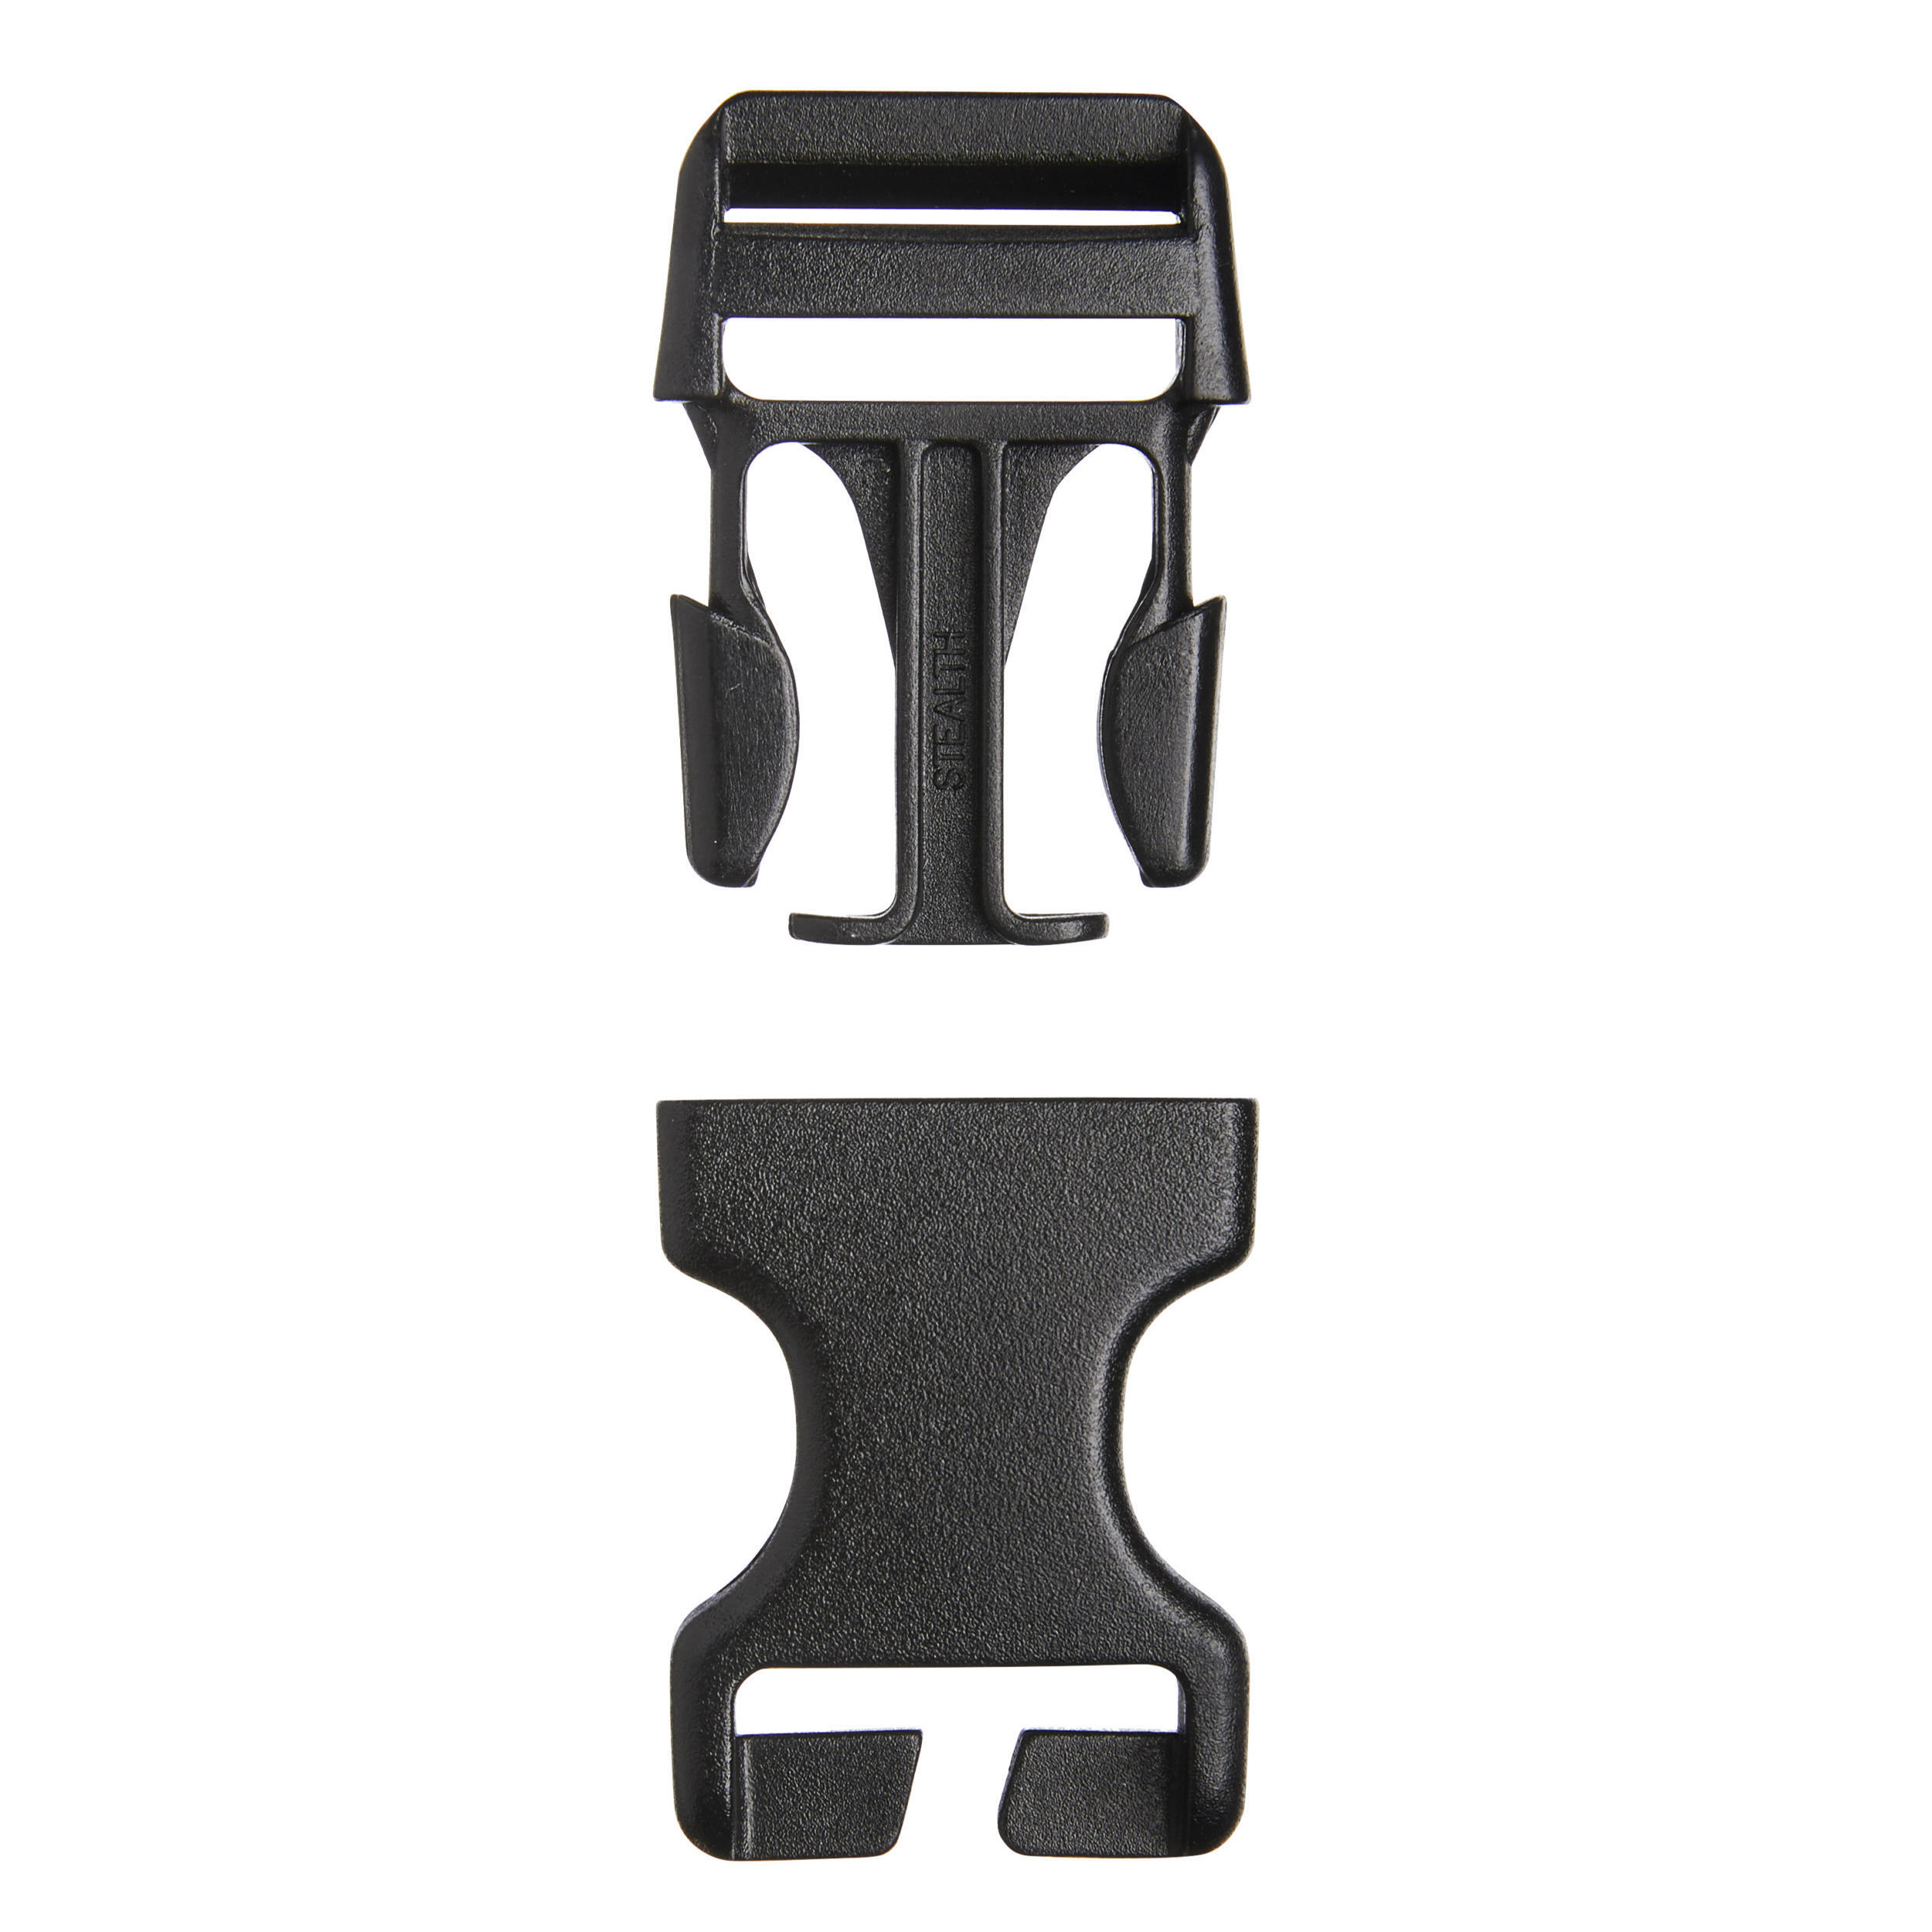 Set of 2 Backpack Quick-Release Buckles - 25mm 3/4